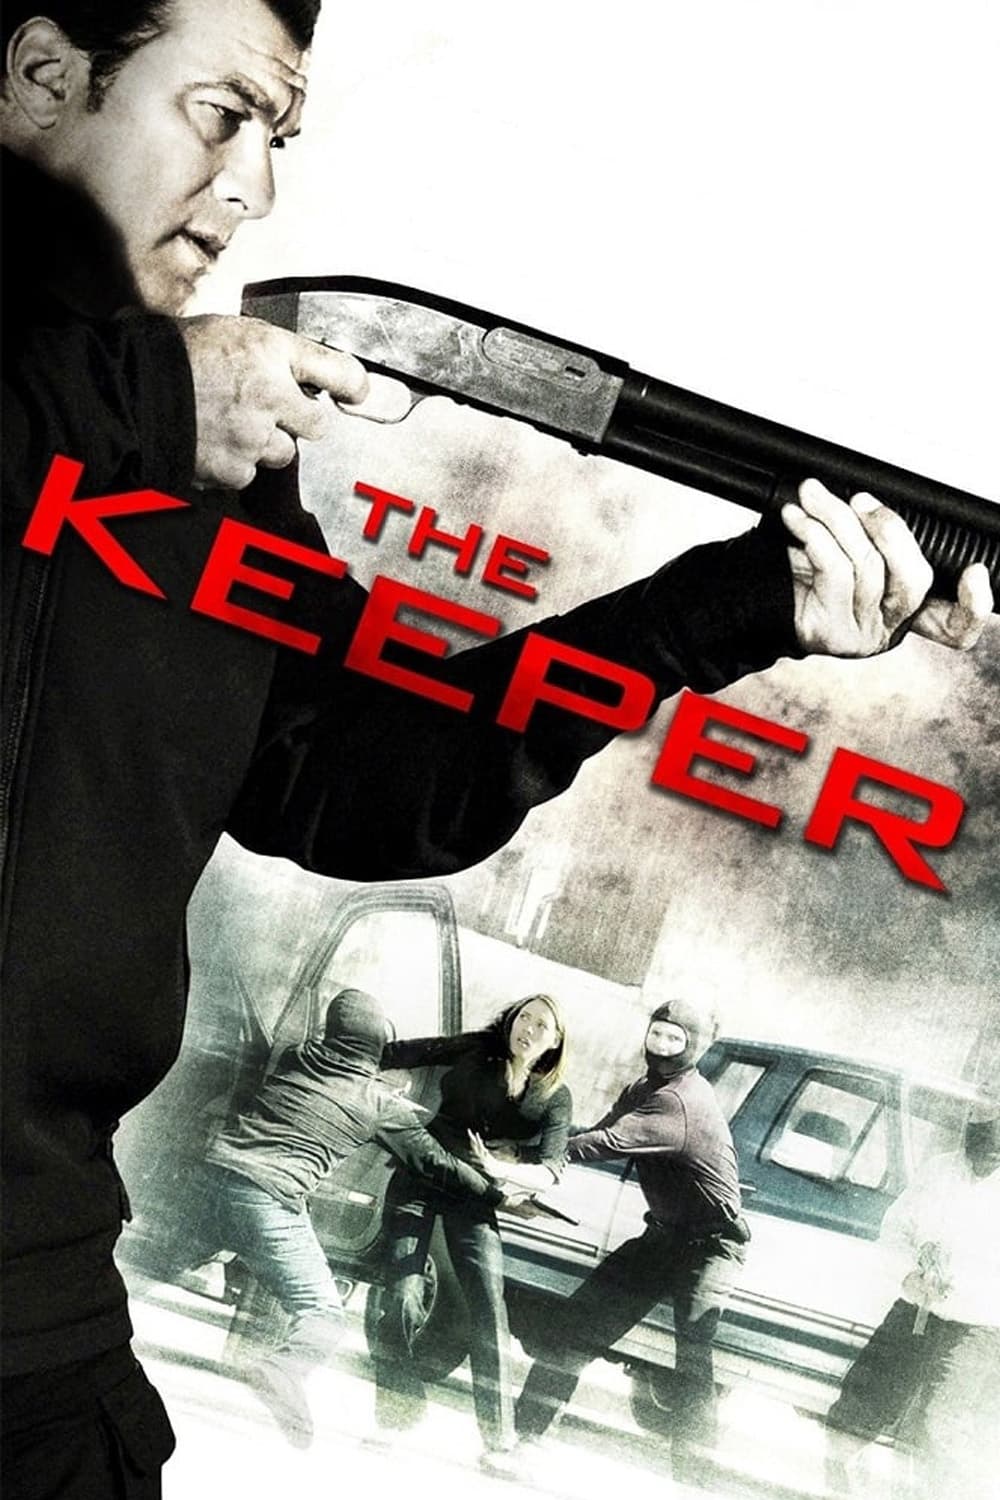 The Keeper (2009)